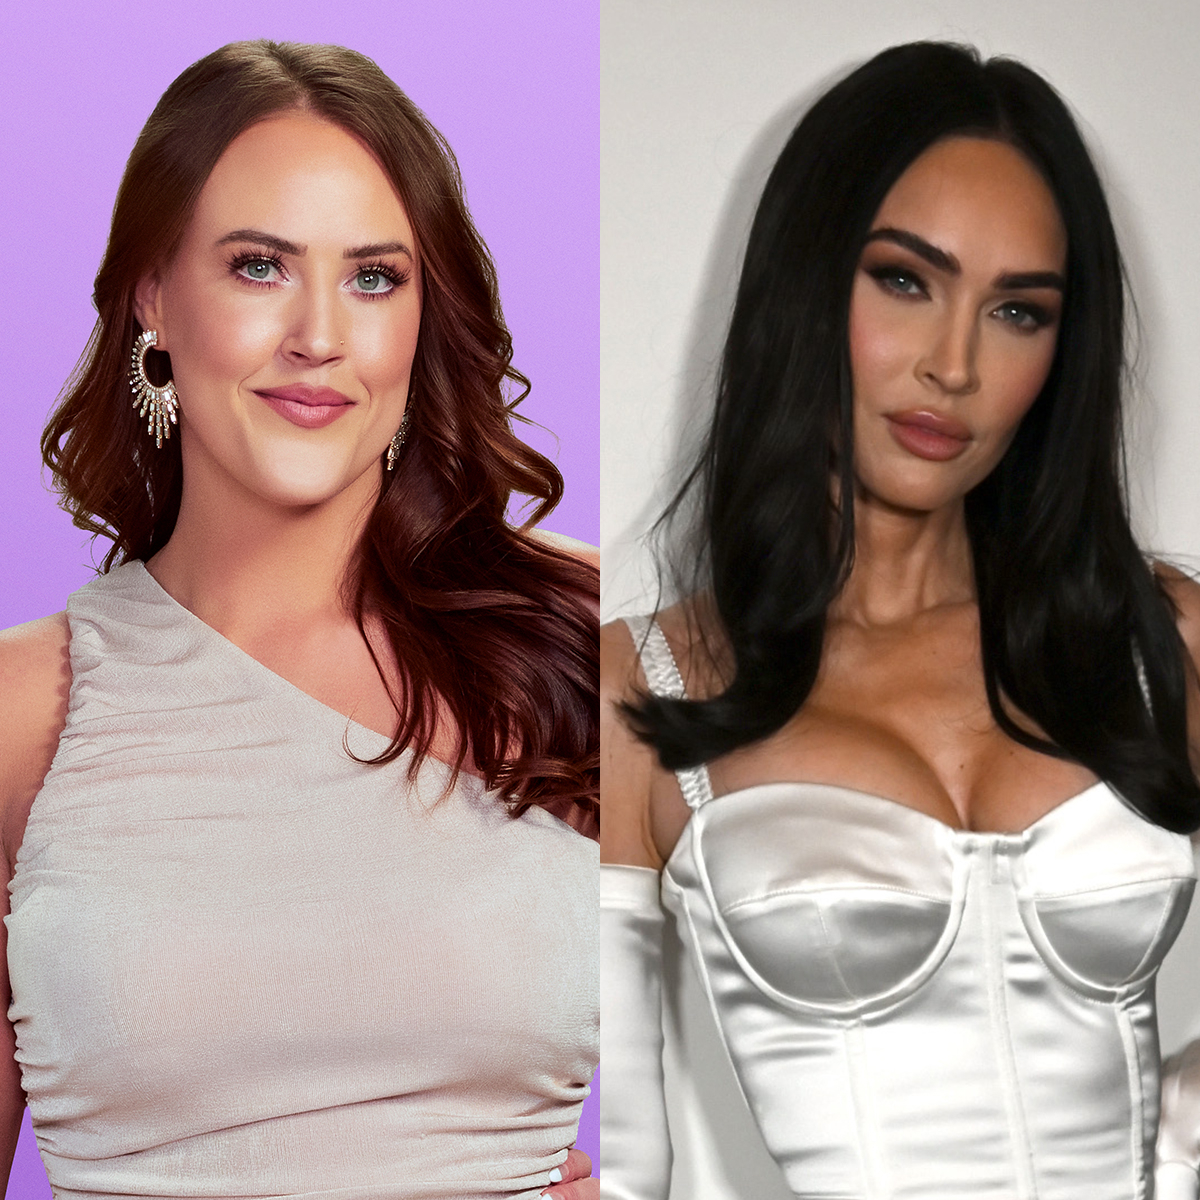 Megan Fox Reacts to Love Is Blind Star Chelsea’s Comparison